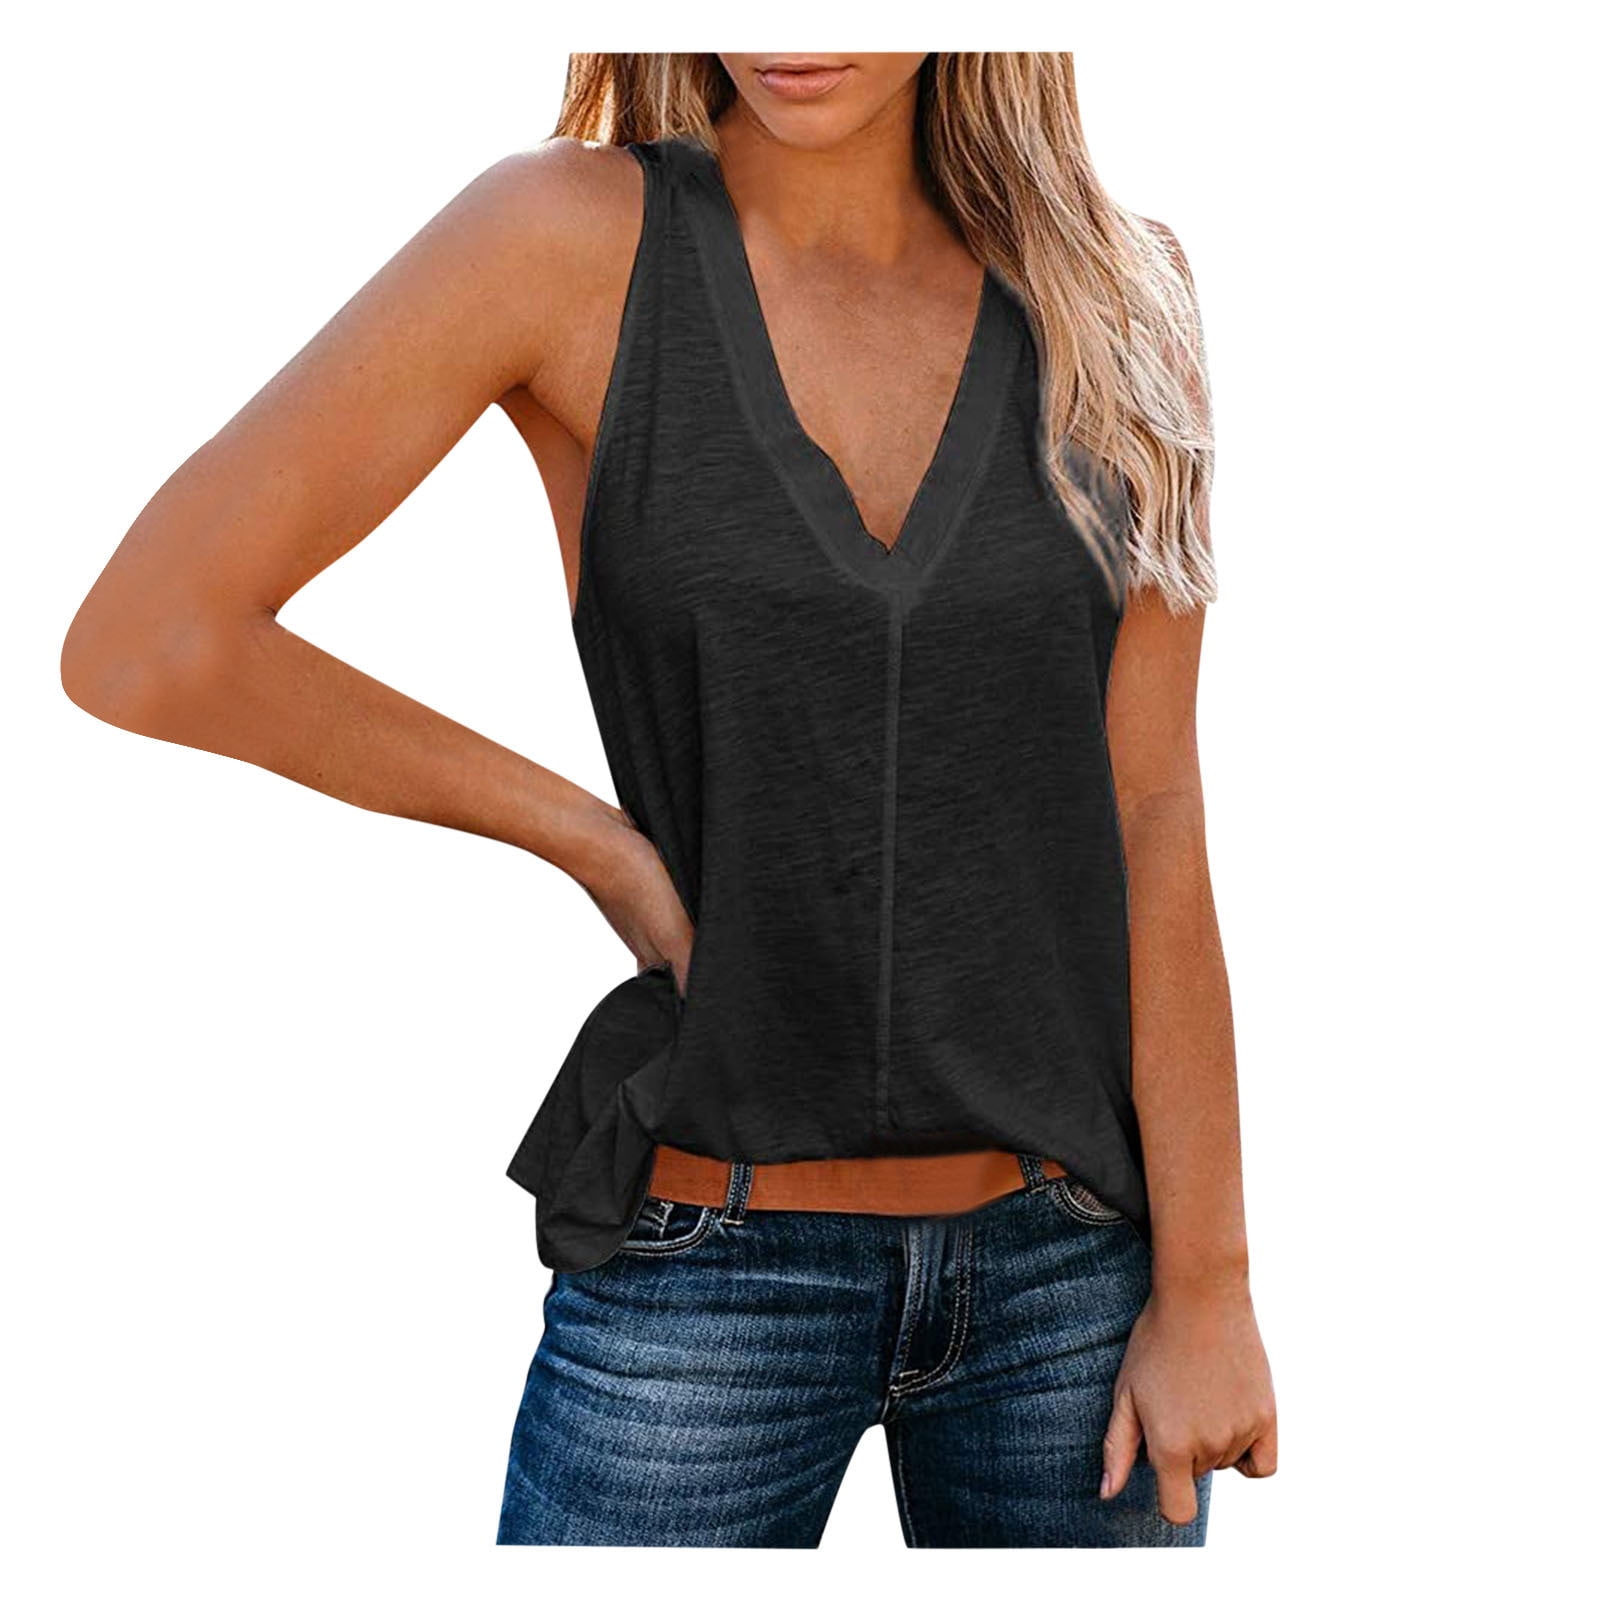 Women's solid Loose Tops Shirt Short Sleeve Blouse Casual Tops T-Shirt Vest